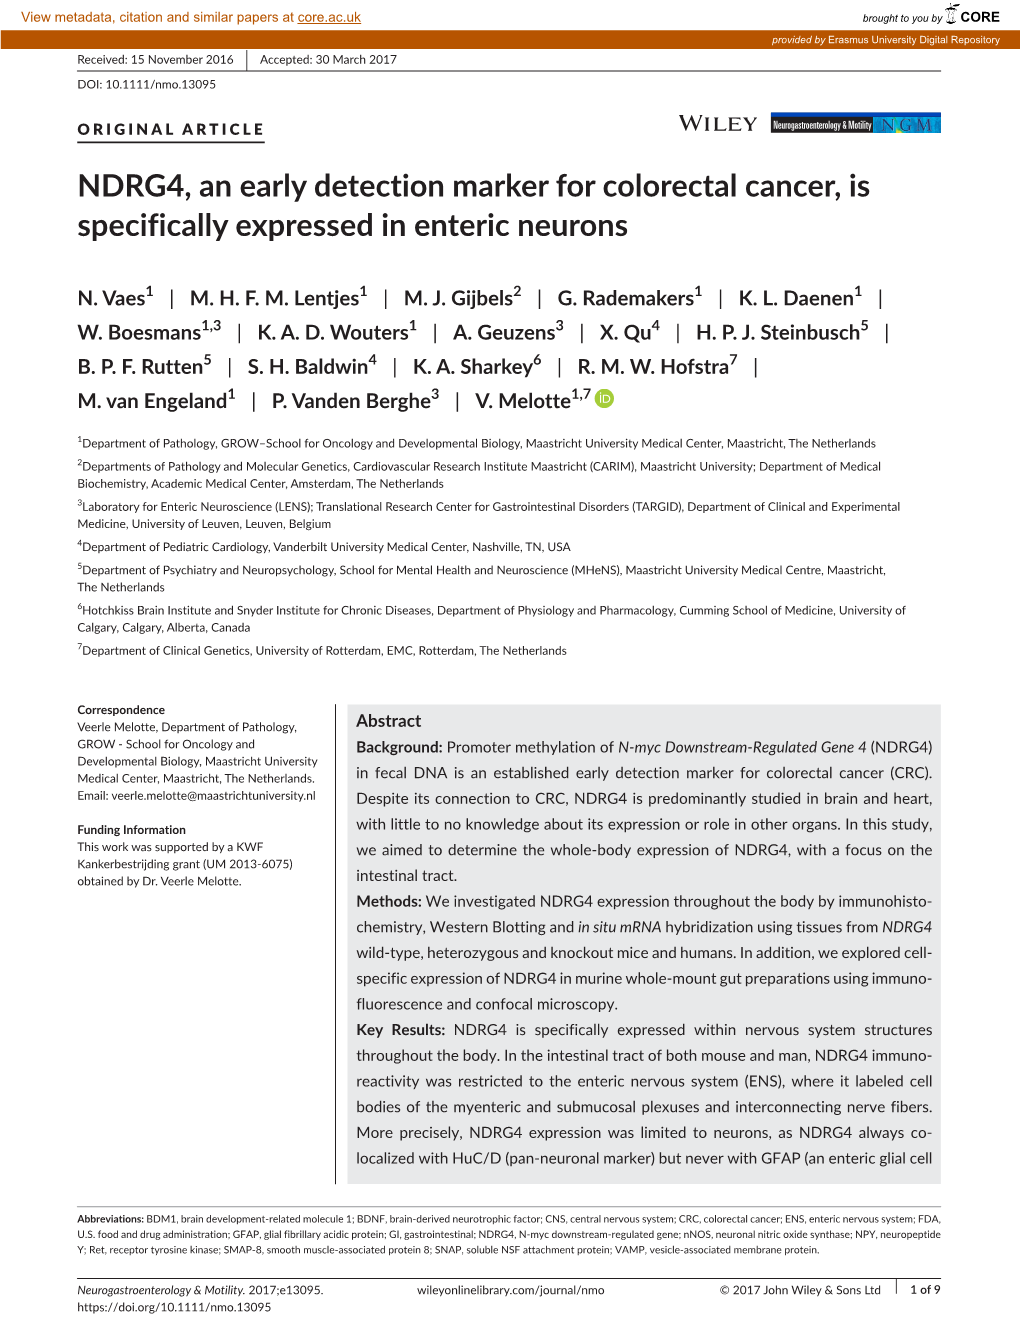 NDRG4, an Early Detection Marker for Colorectal Cancer, Is Specifically Expressed in Enteric Neurons